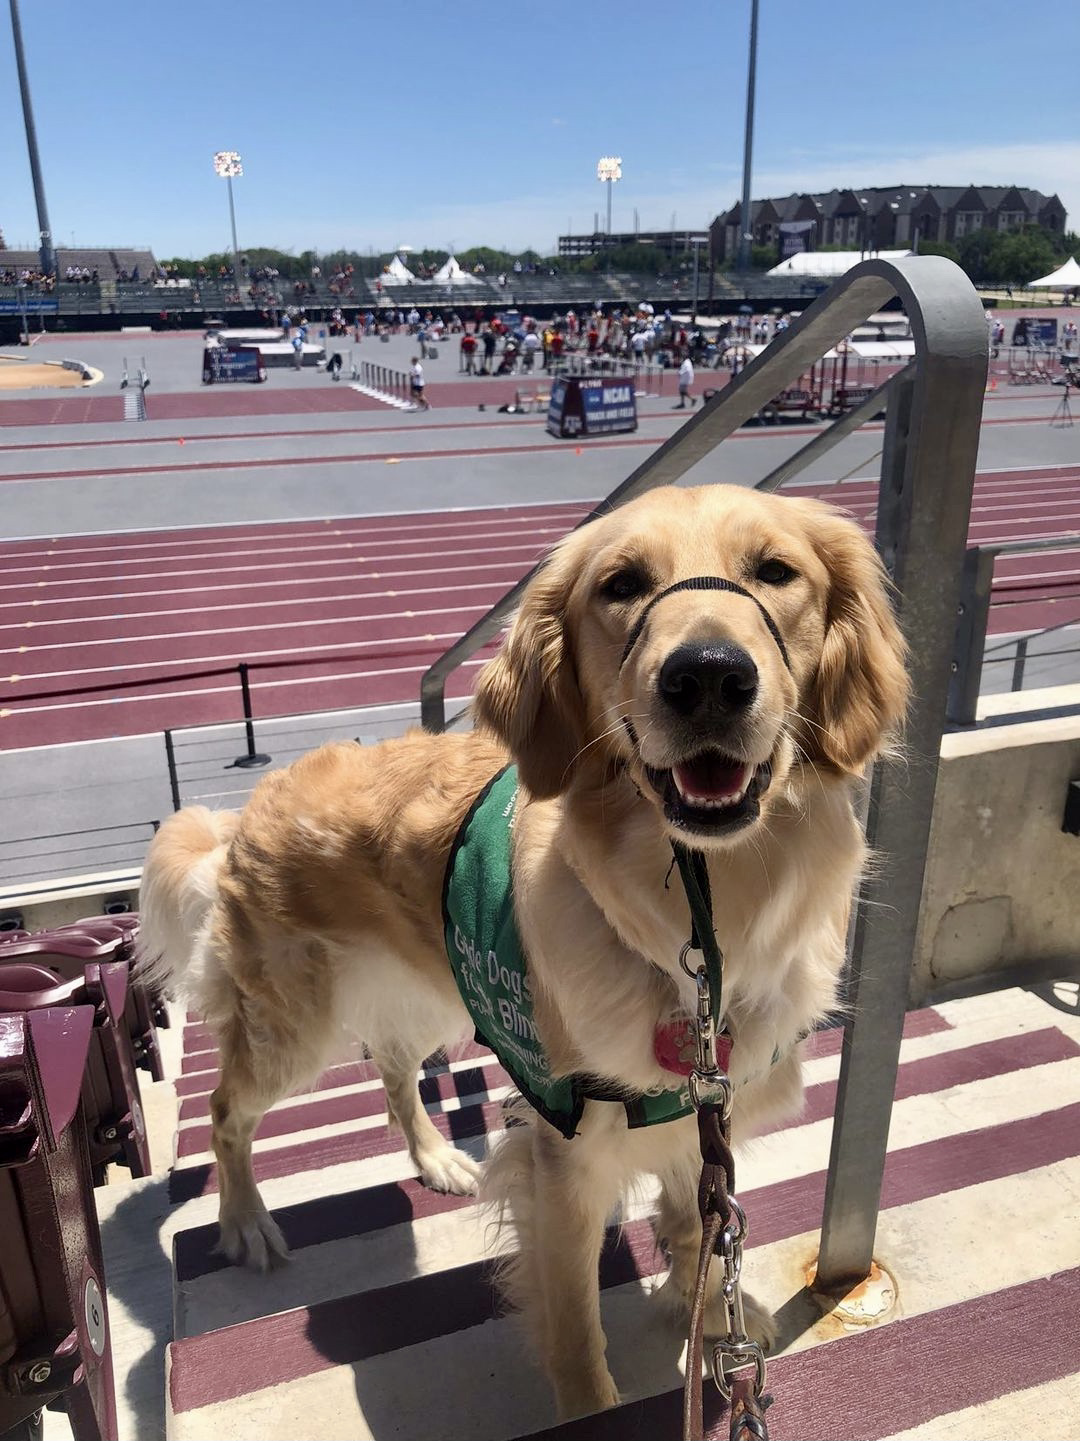 Golden Retriever puppy in training standing and facing the camera. She is on the bleachers and behind her is a sporting event.